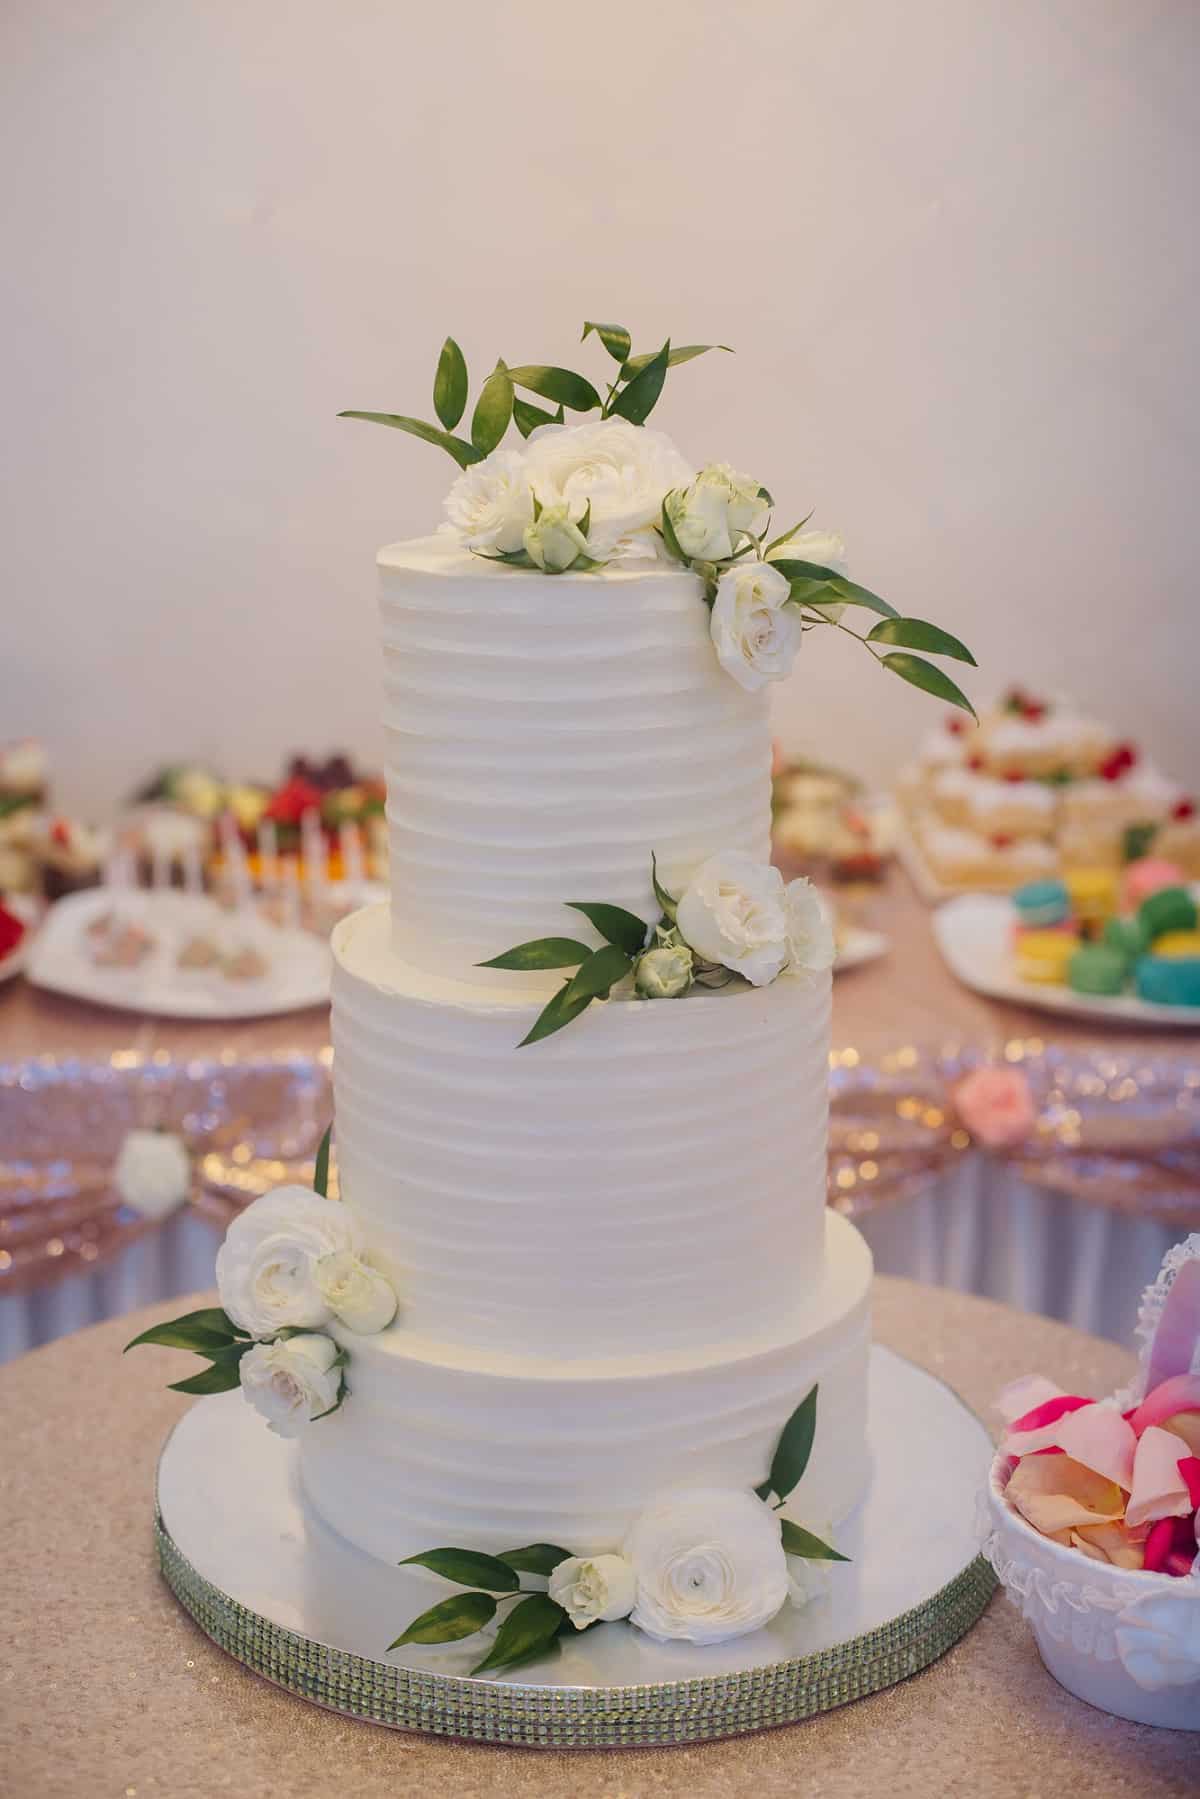 Three tiered white cake with white flowers.